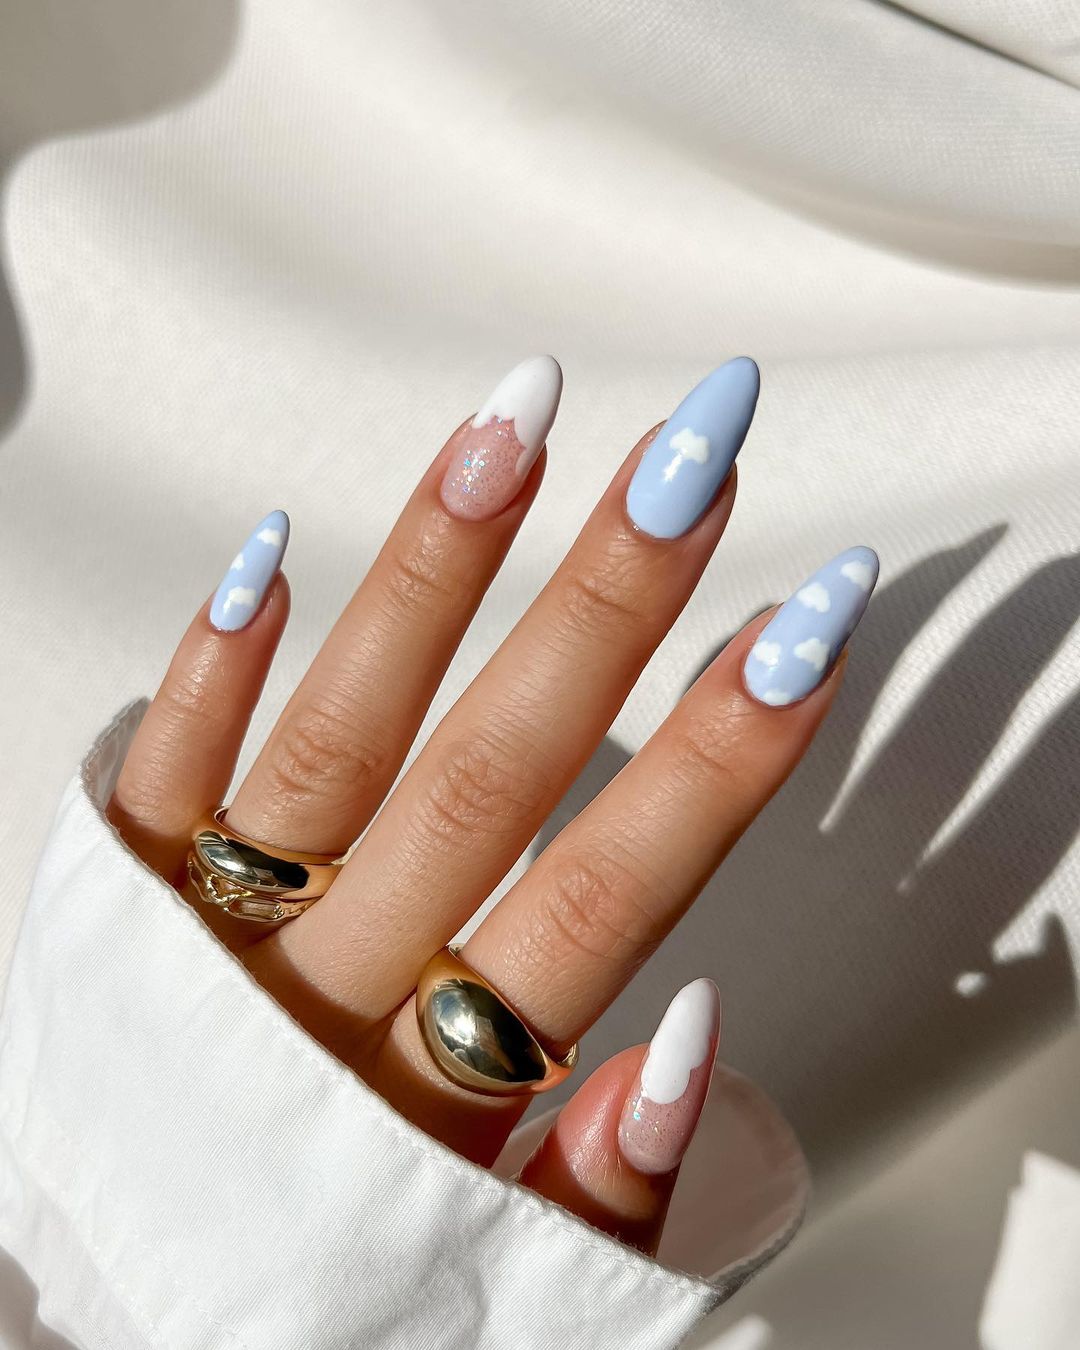 30 Easy Nails & Nail Art Designs To Try In 2022 images 22